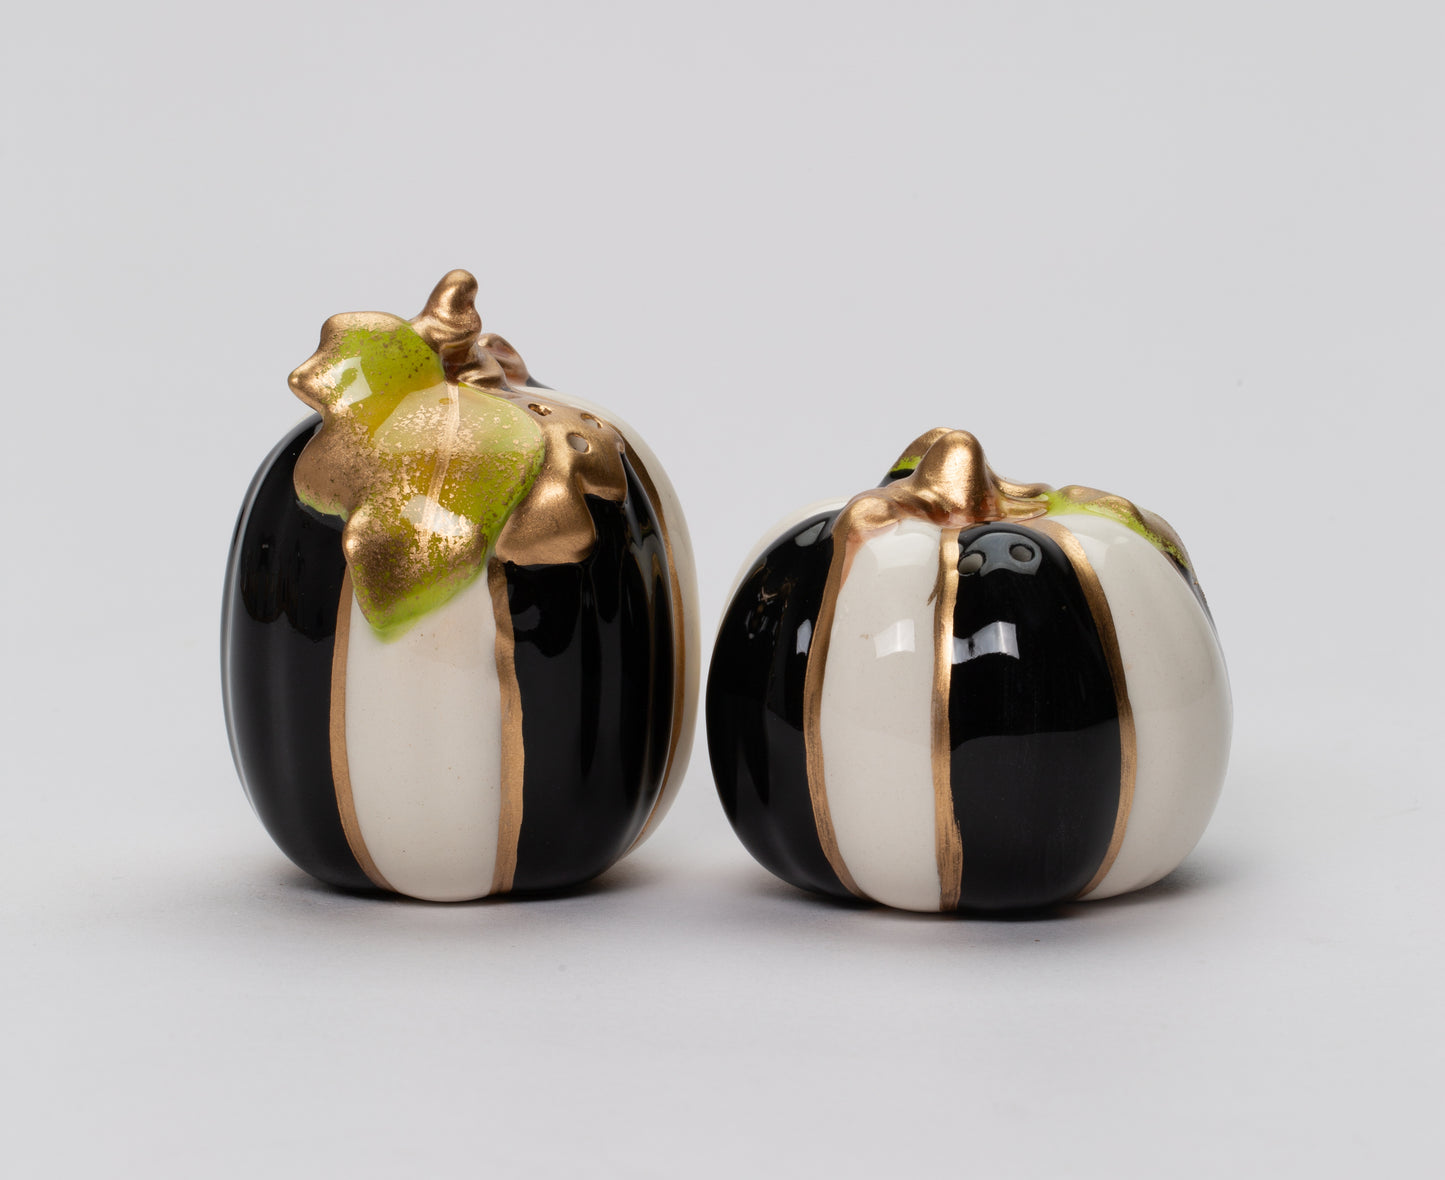 Ceramic Black and White Pumpkin Salt And Pepper Shakers, Home Décor, Gift for Her, Gift for Mom, Kitchen Décor, Fall Décor, Halloween Décor